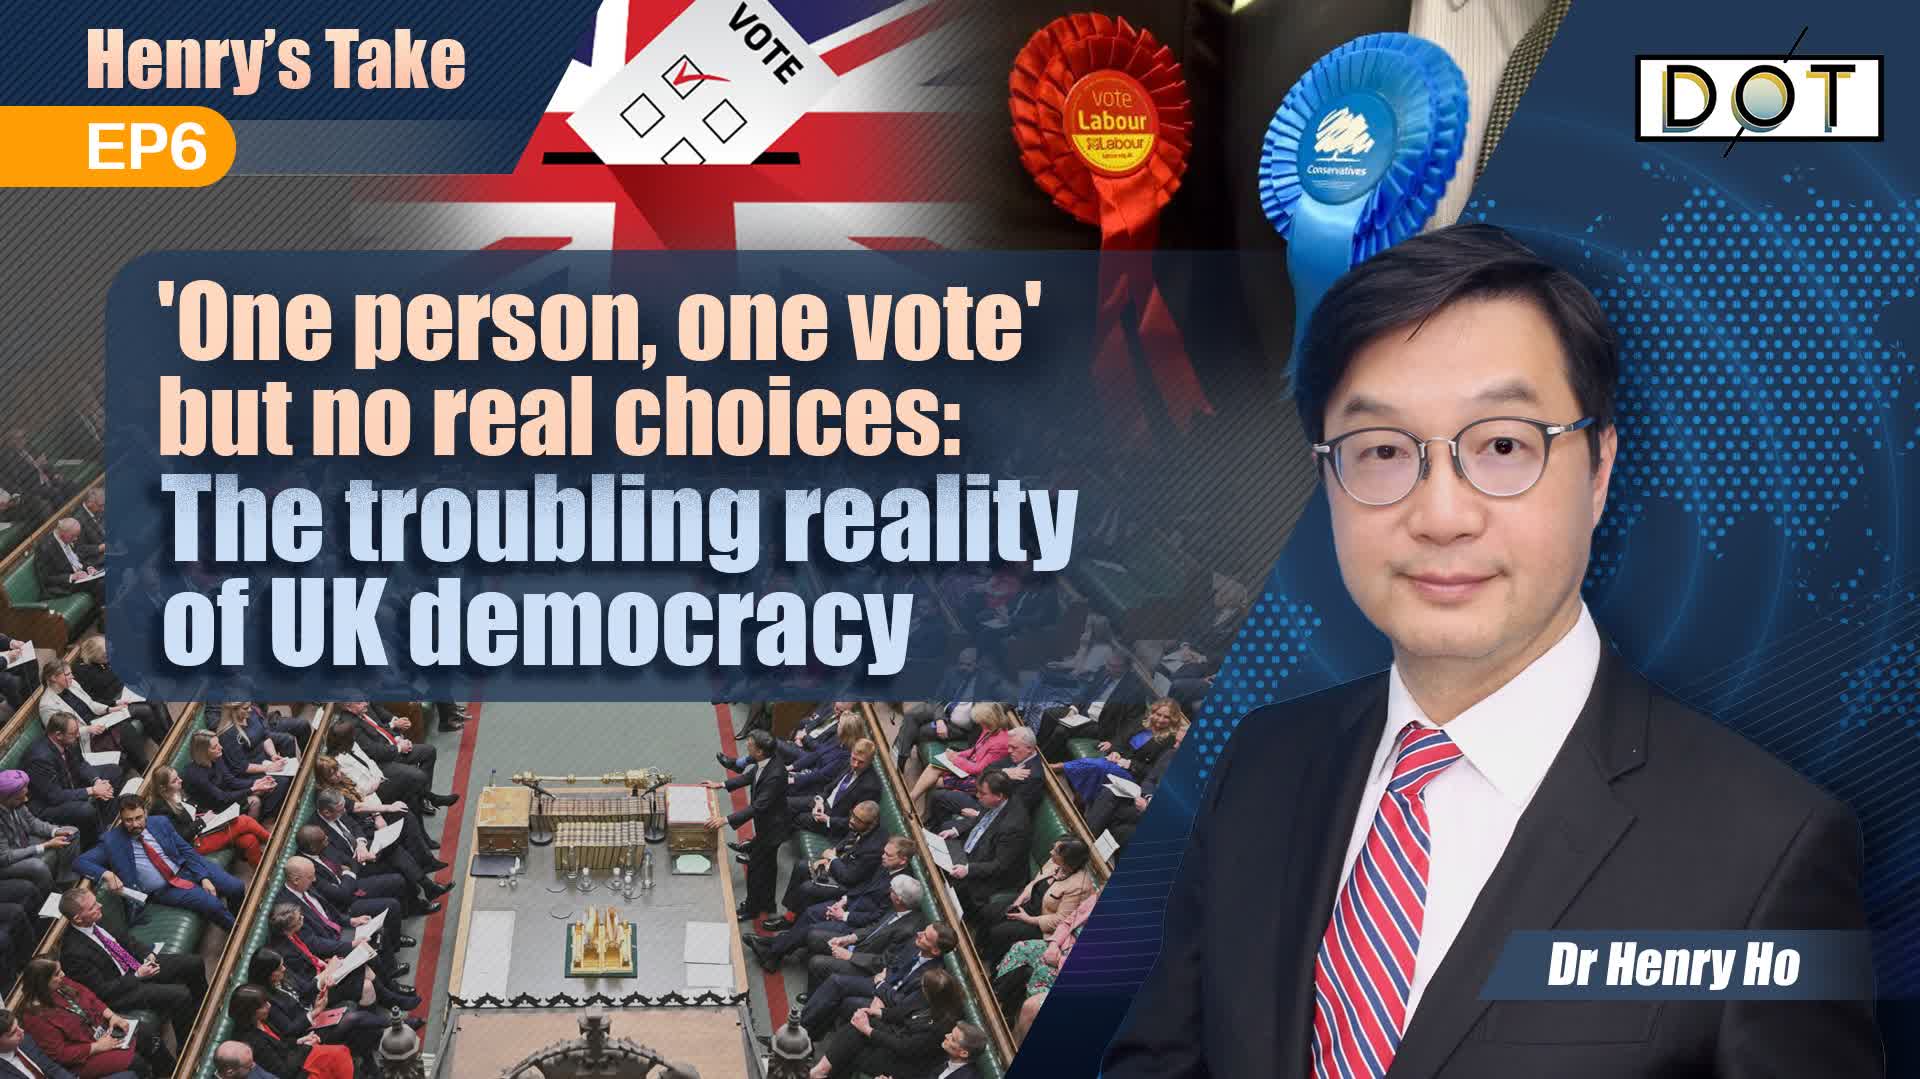 Henry's Take EP6 | 'One person, one vote' but no real choices: The troubling reality of UK democracy